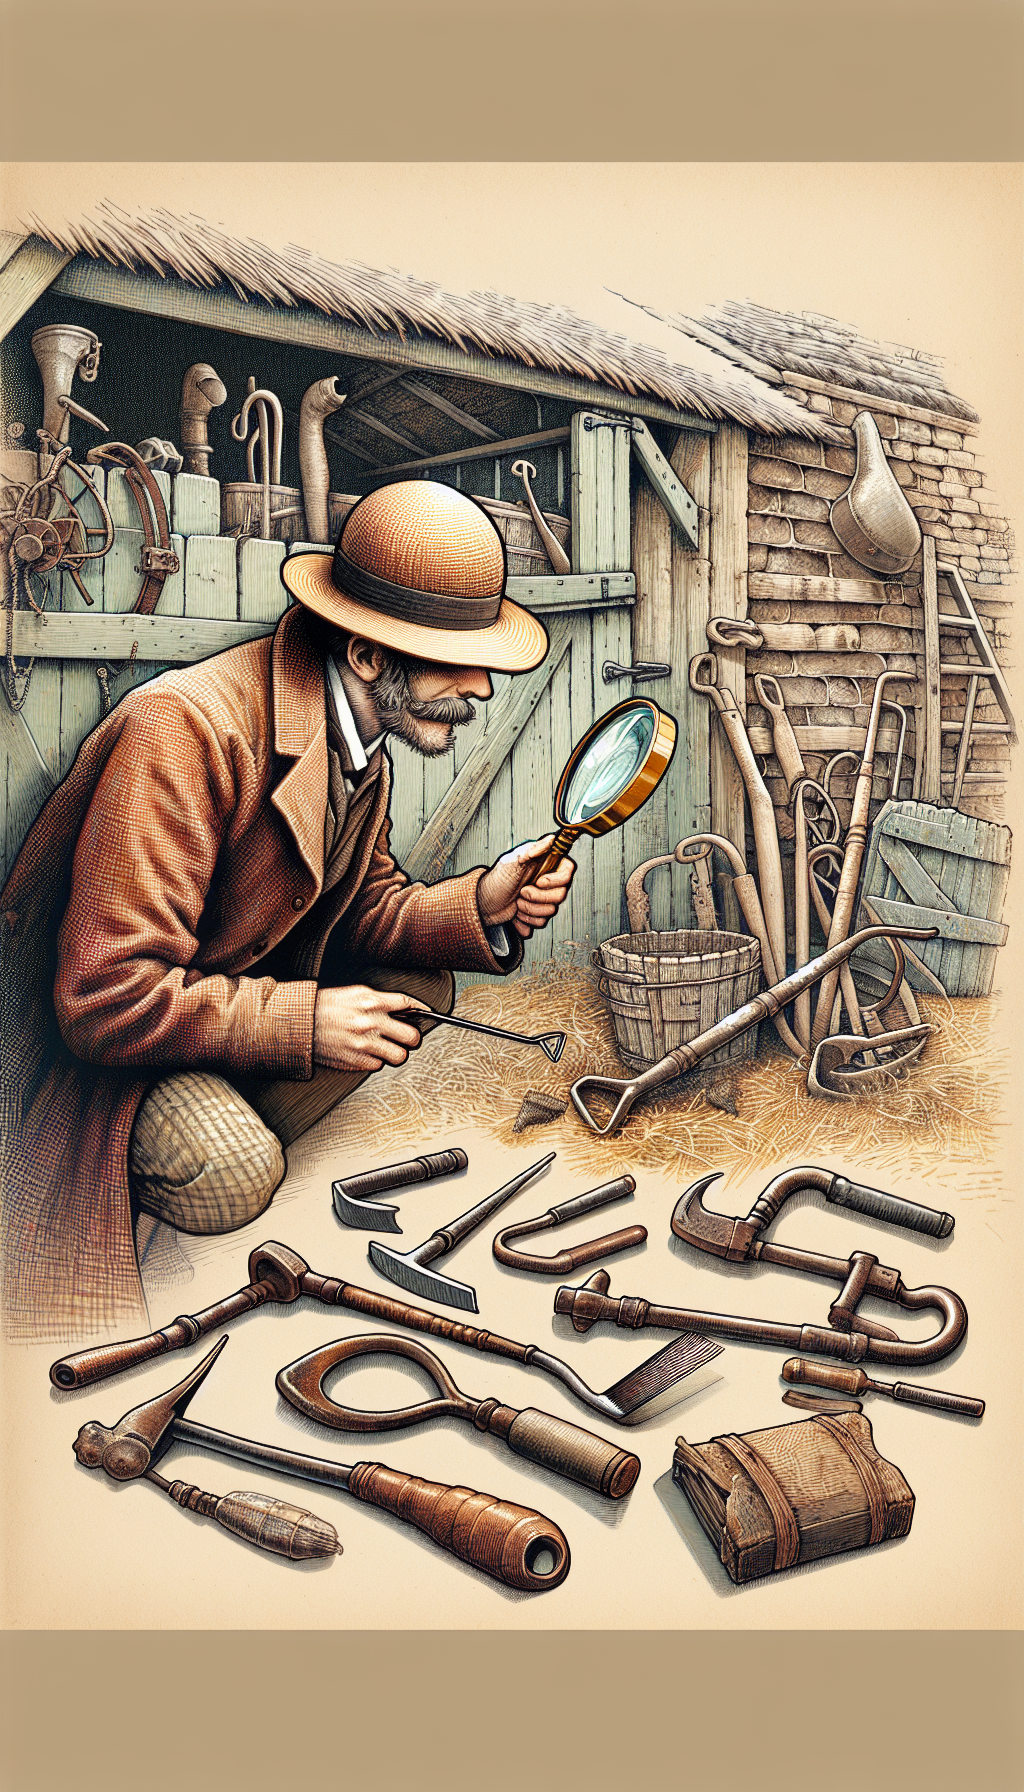 An idyllic countryside scene unfolds, where Sherlock Holmes playfully dons a straw hat, peering through a magnifying glass at a collection of antique farm tools scattered across a rustic barn floor. Intricate line art and soft watercolor patches highlight the shapes and details of each tool, inviting the viewer to join in the nostalgic detective work of agricultural history.